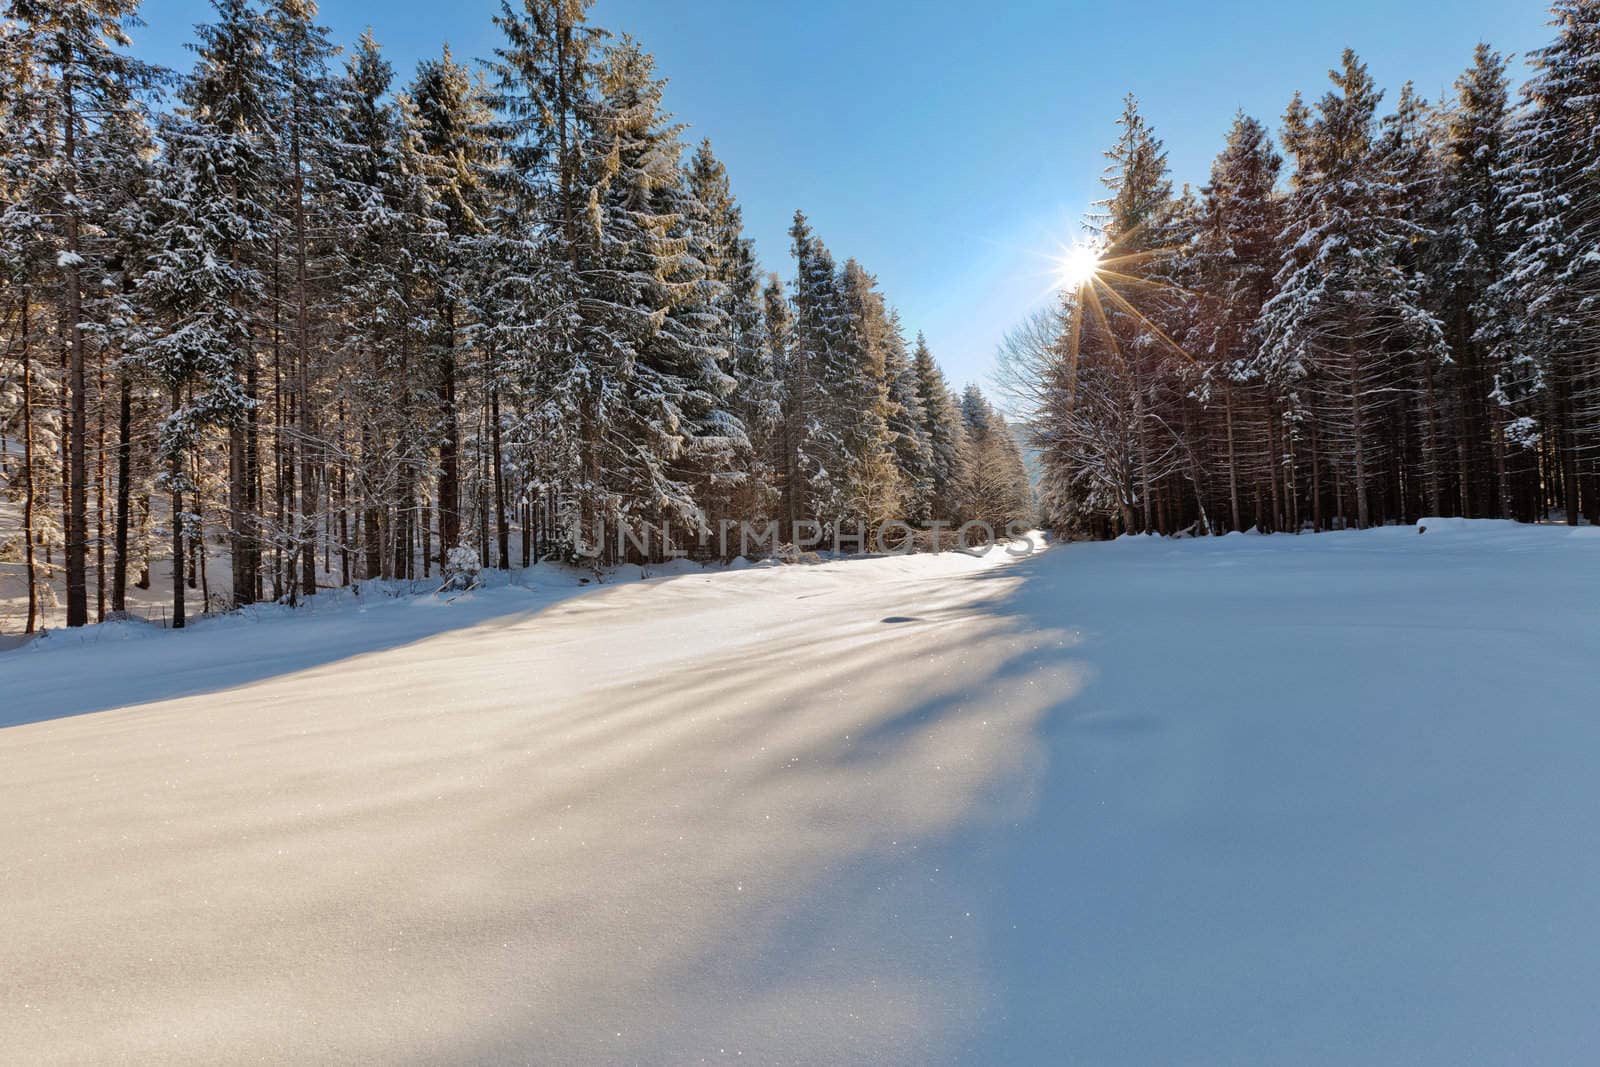 Wonderful image of winter forest and meadow with light and shadows